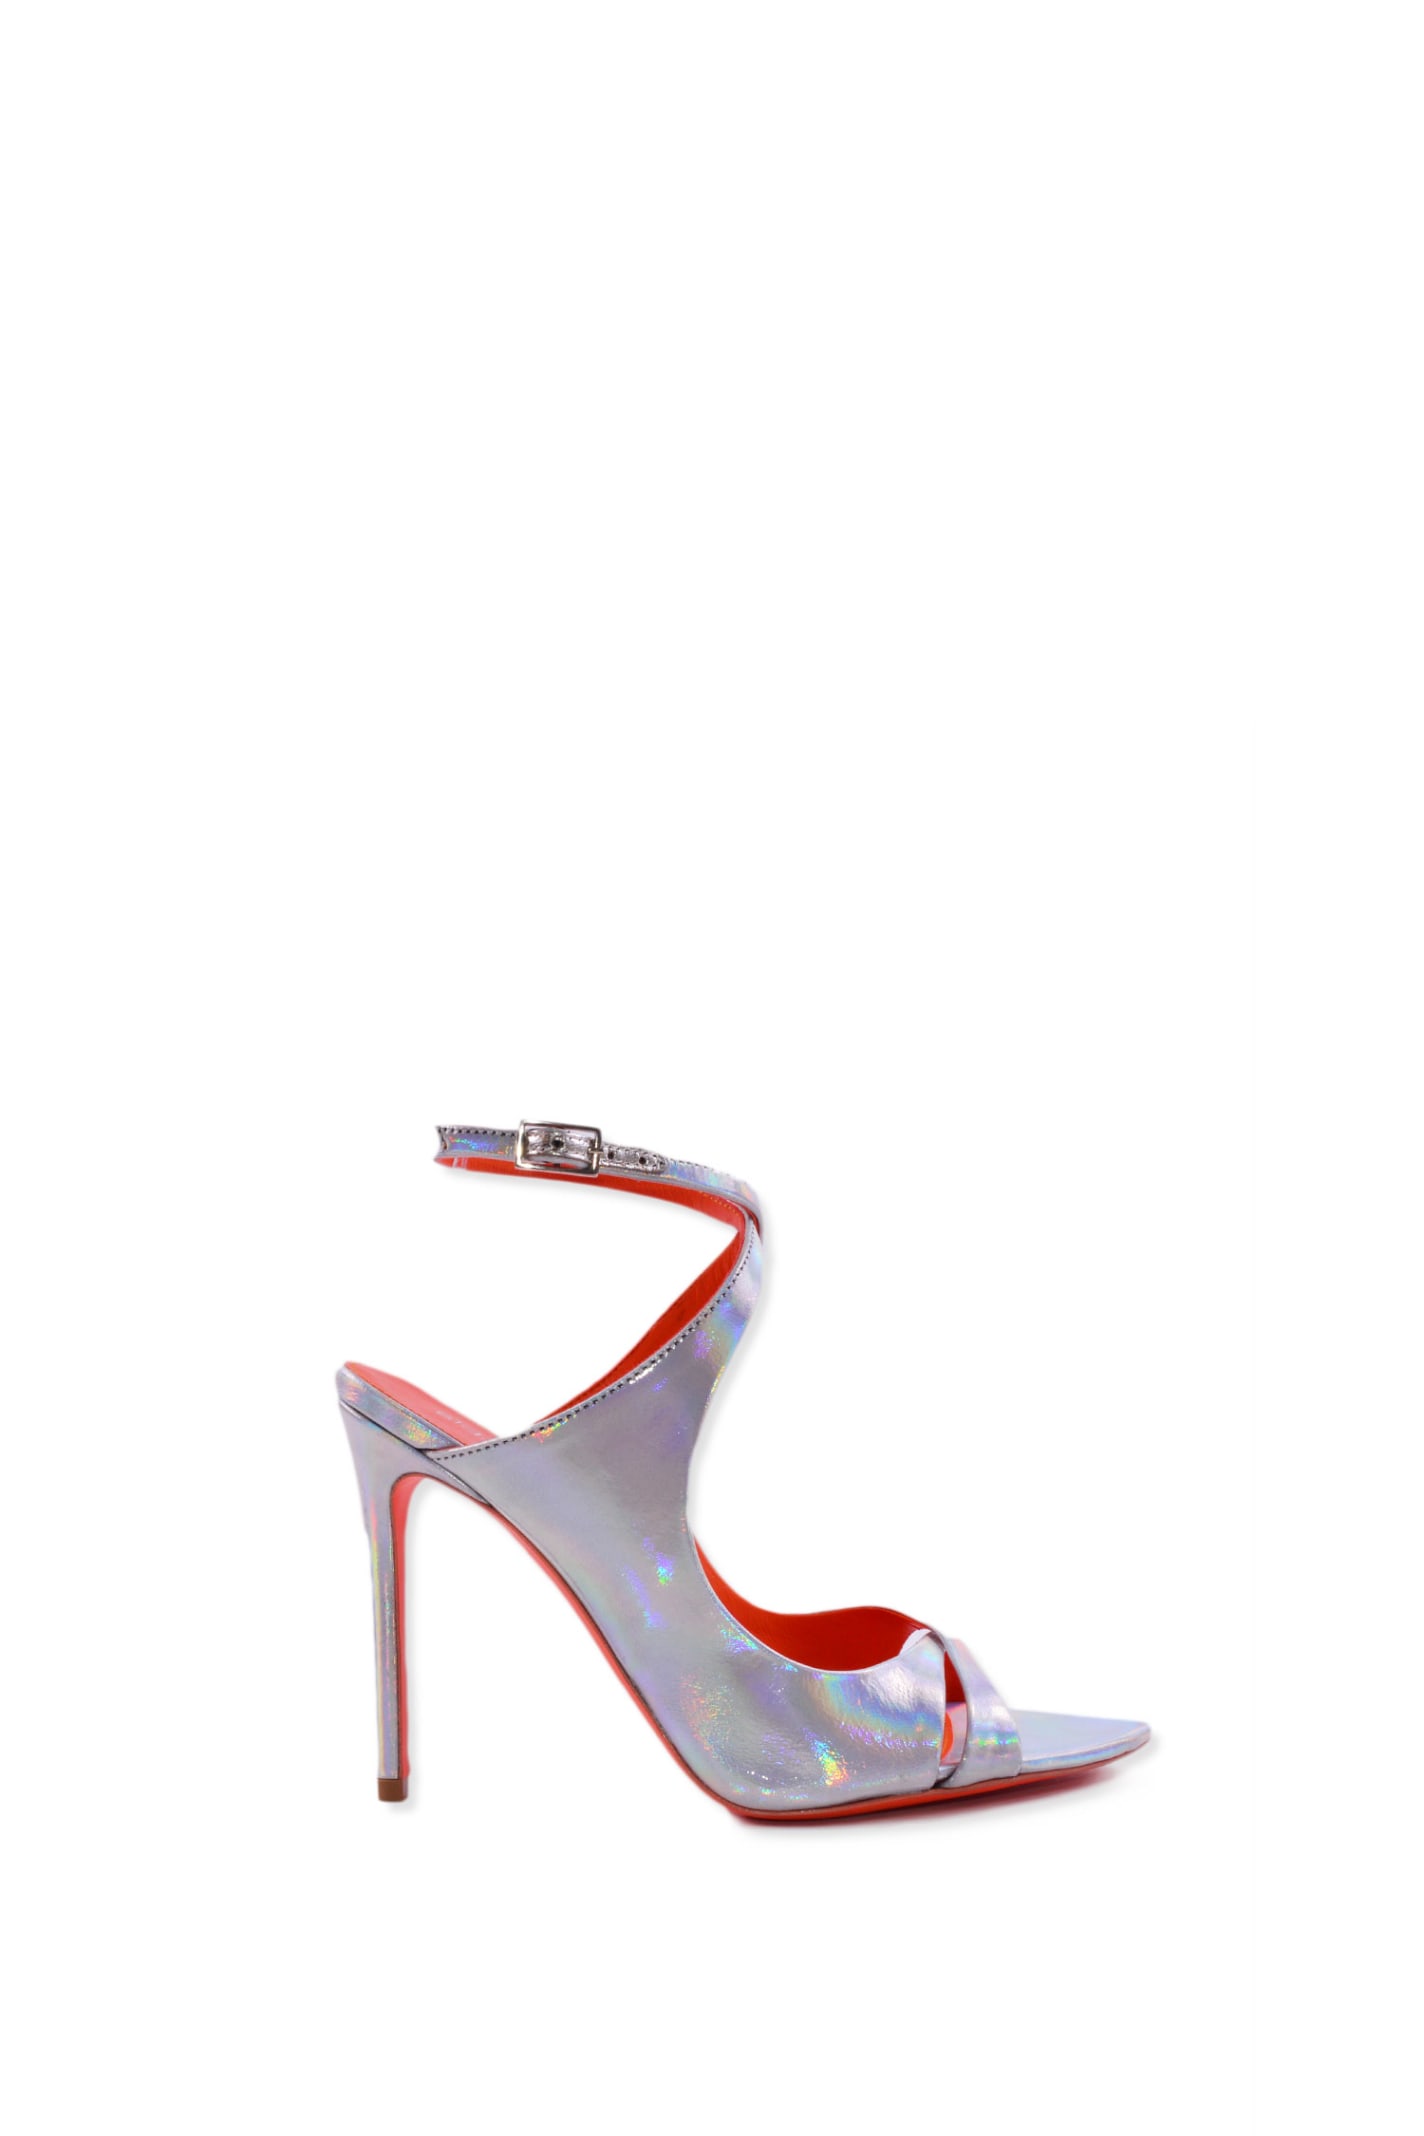 Aldo Castagna Shoes With Heels In Argento